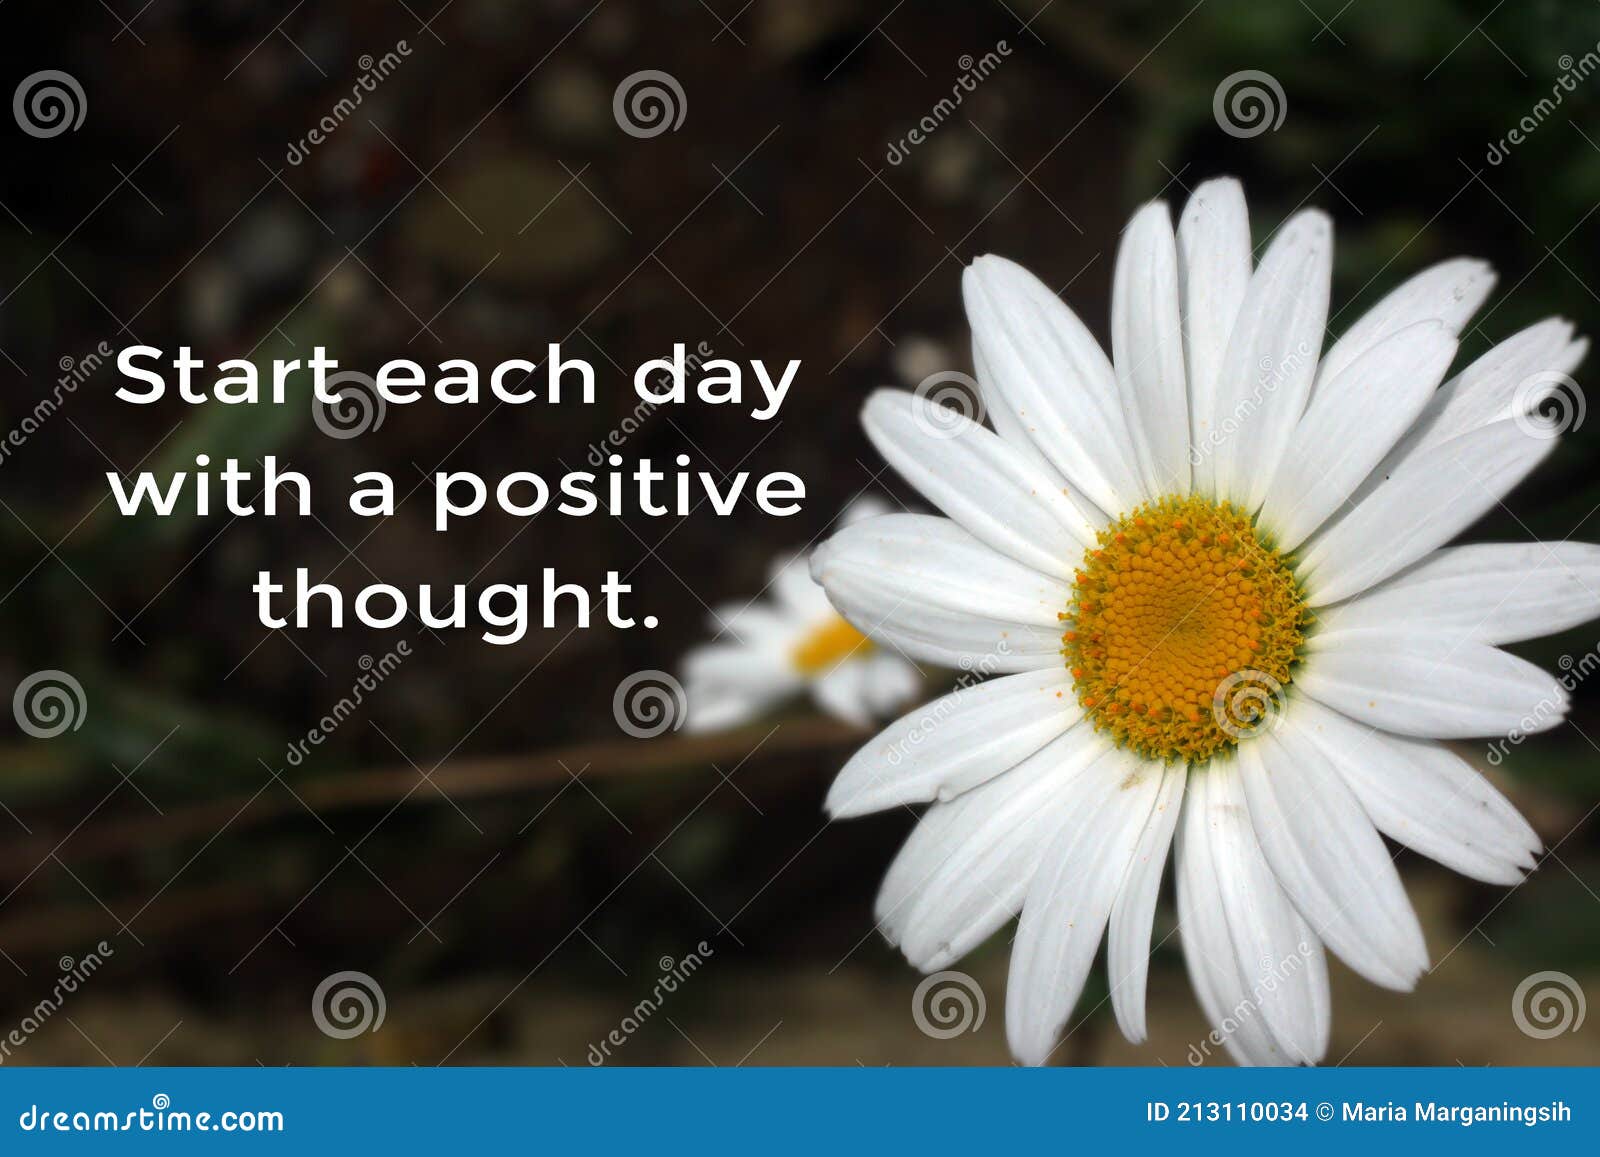 Inspirational Words - Start Each Day with a Positive Thought. Business  Motivational Words Concept with Spring White Daisy Flowers Stock Photo -  Image of improvement, kindness: 213110034